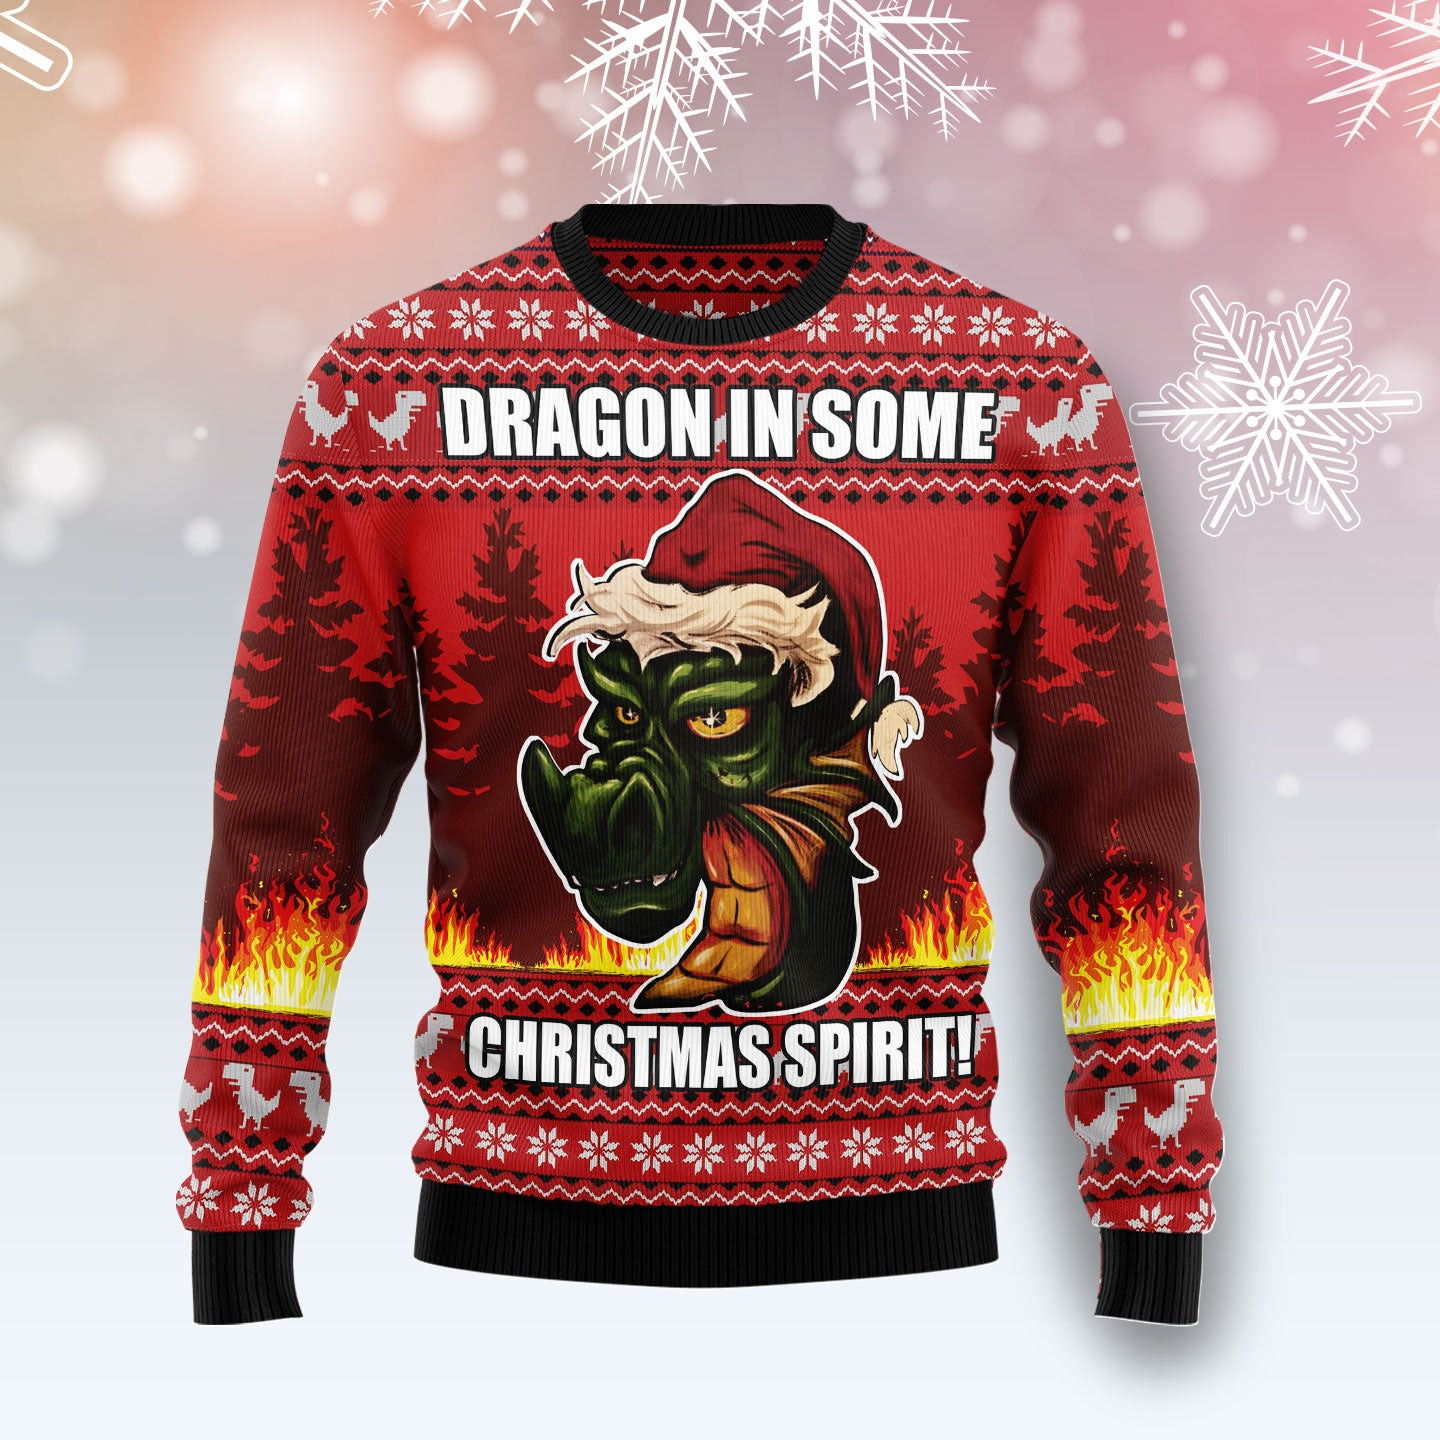 Dragon in some Christmas Spirit Ugly Christmas Sweater